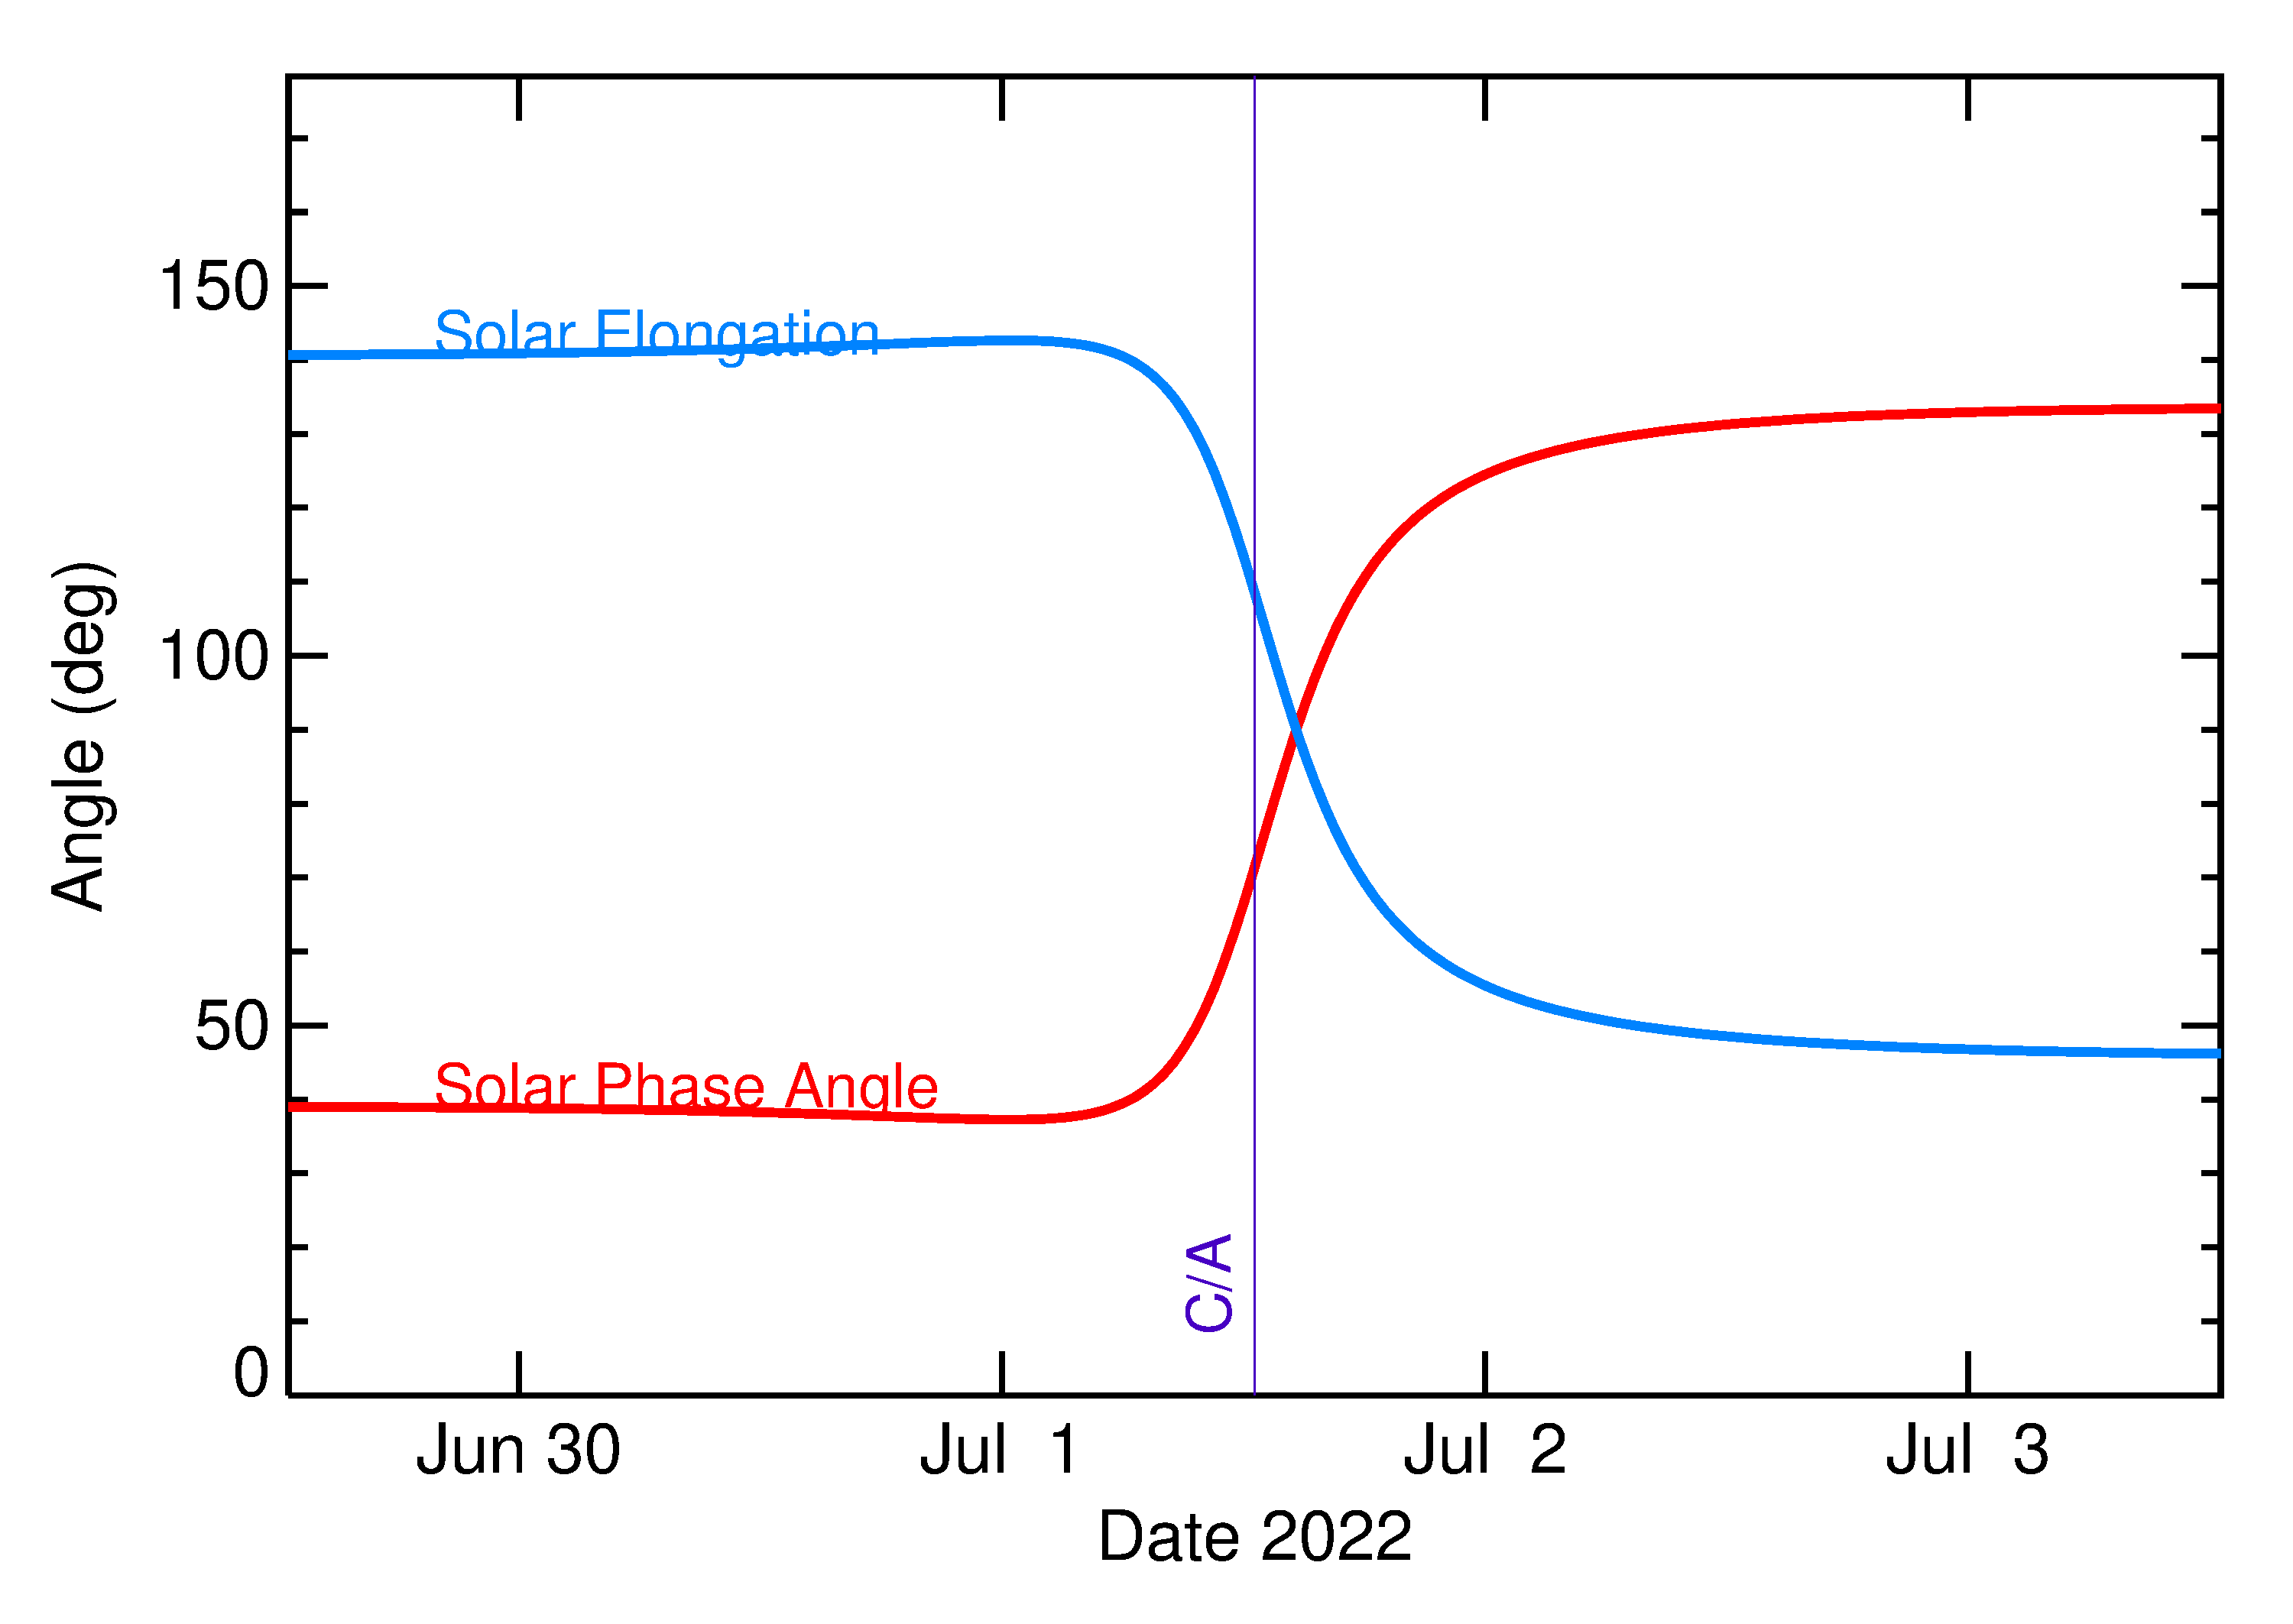 Solar Elongation and Solar Phase Angle of 2022 MJ3 in the days around closest approach